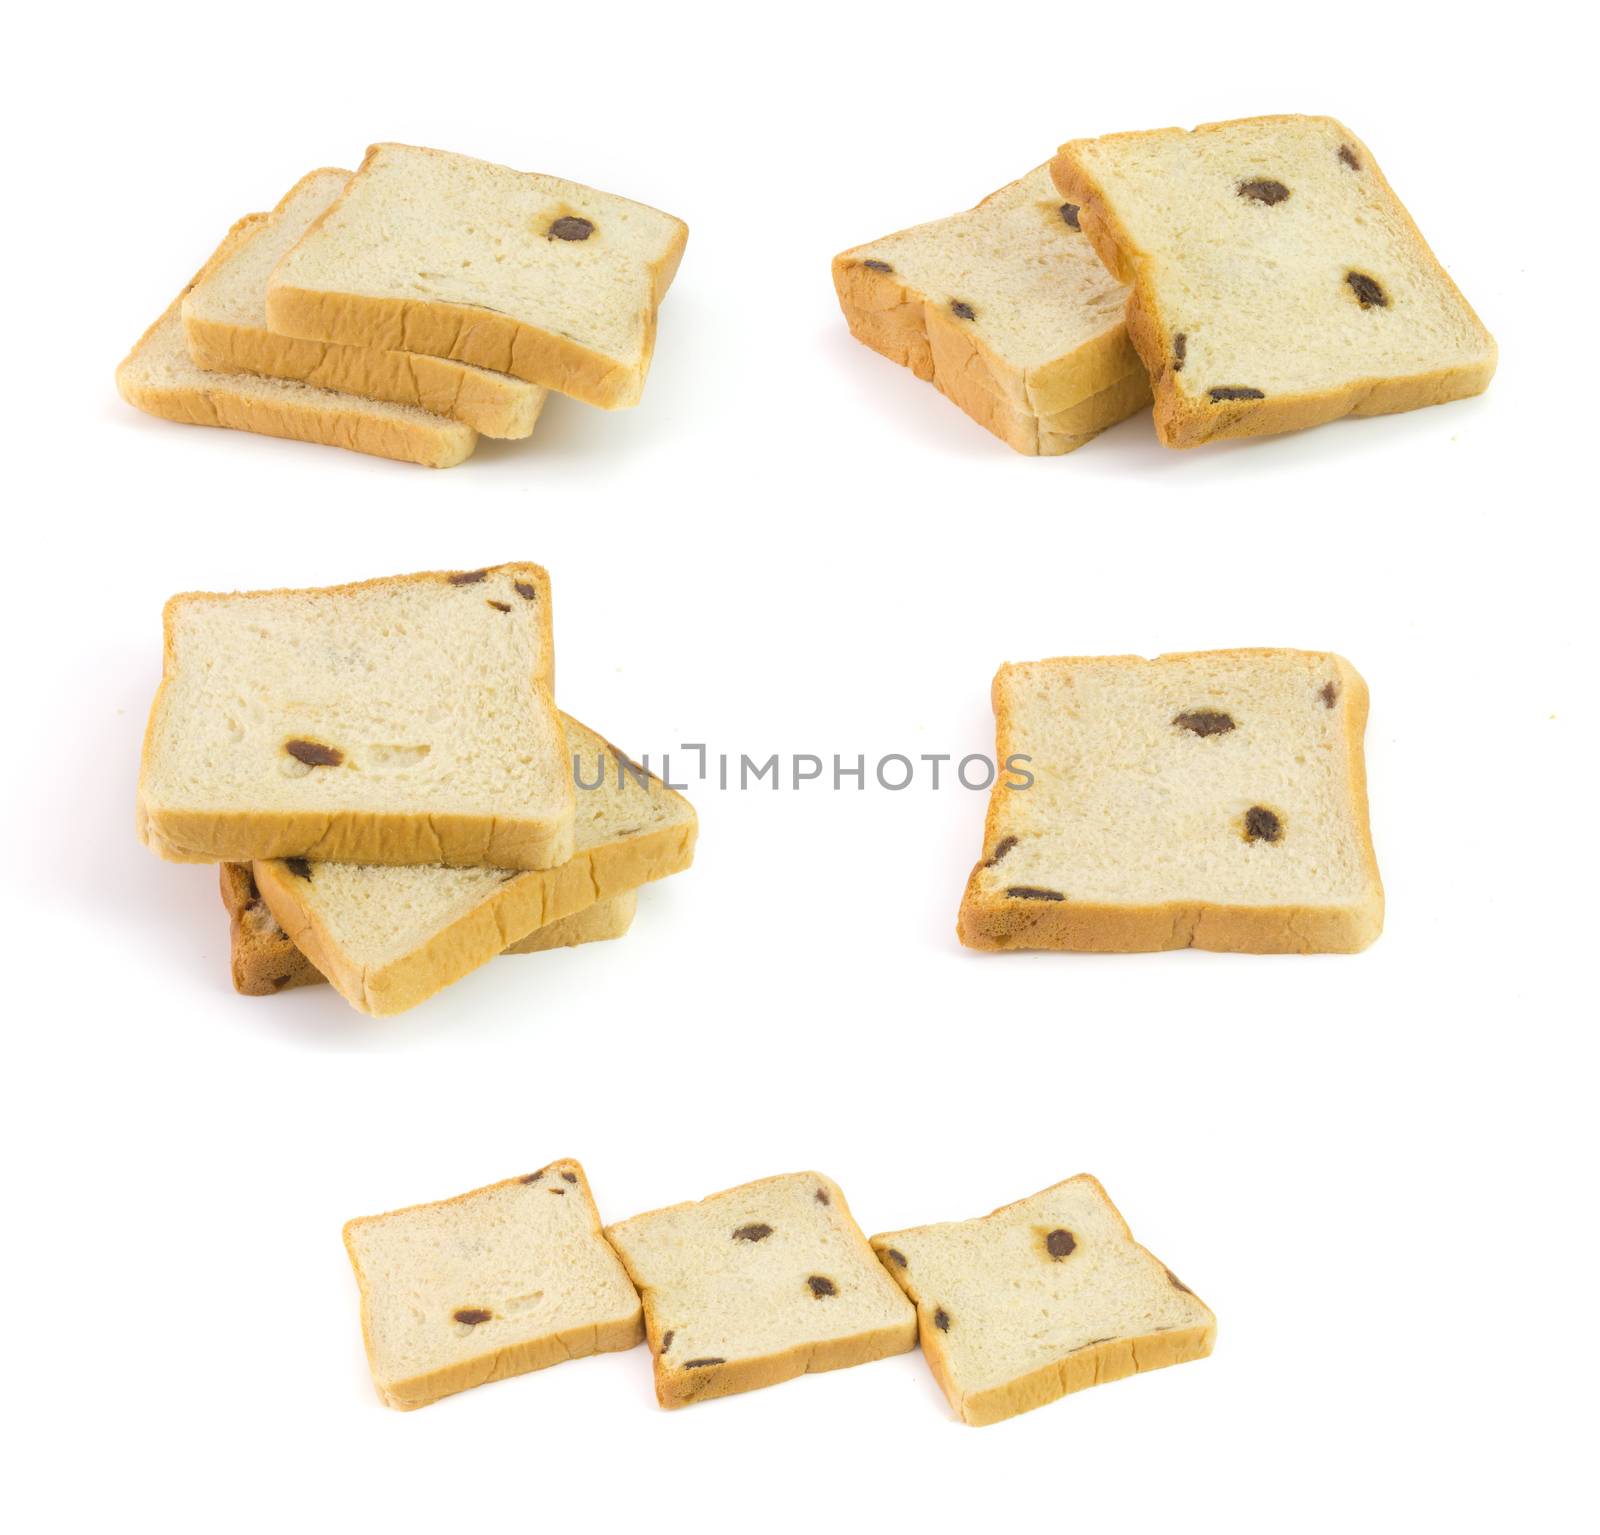 raisin bread isolated on white by chingraph